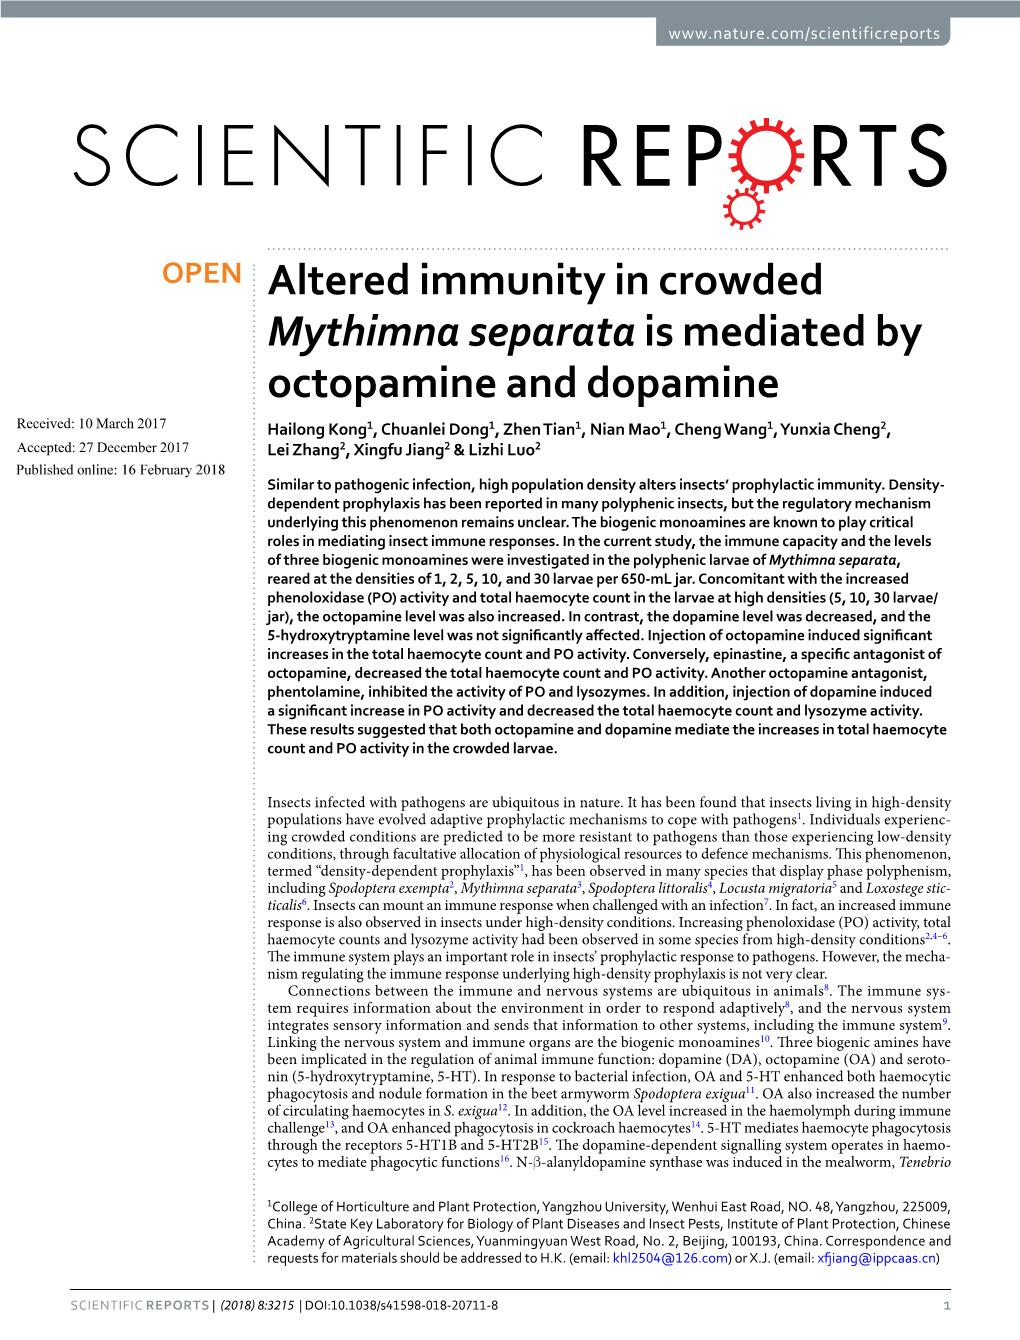 Altered Immunity in Crowded Mythimna Separata Is Mediated By